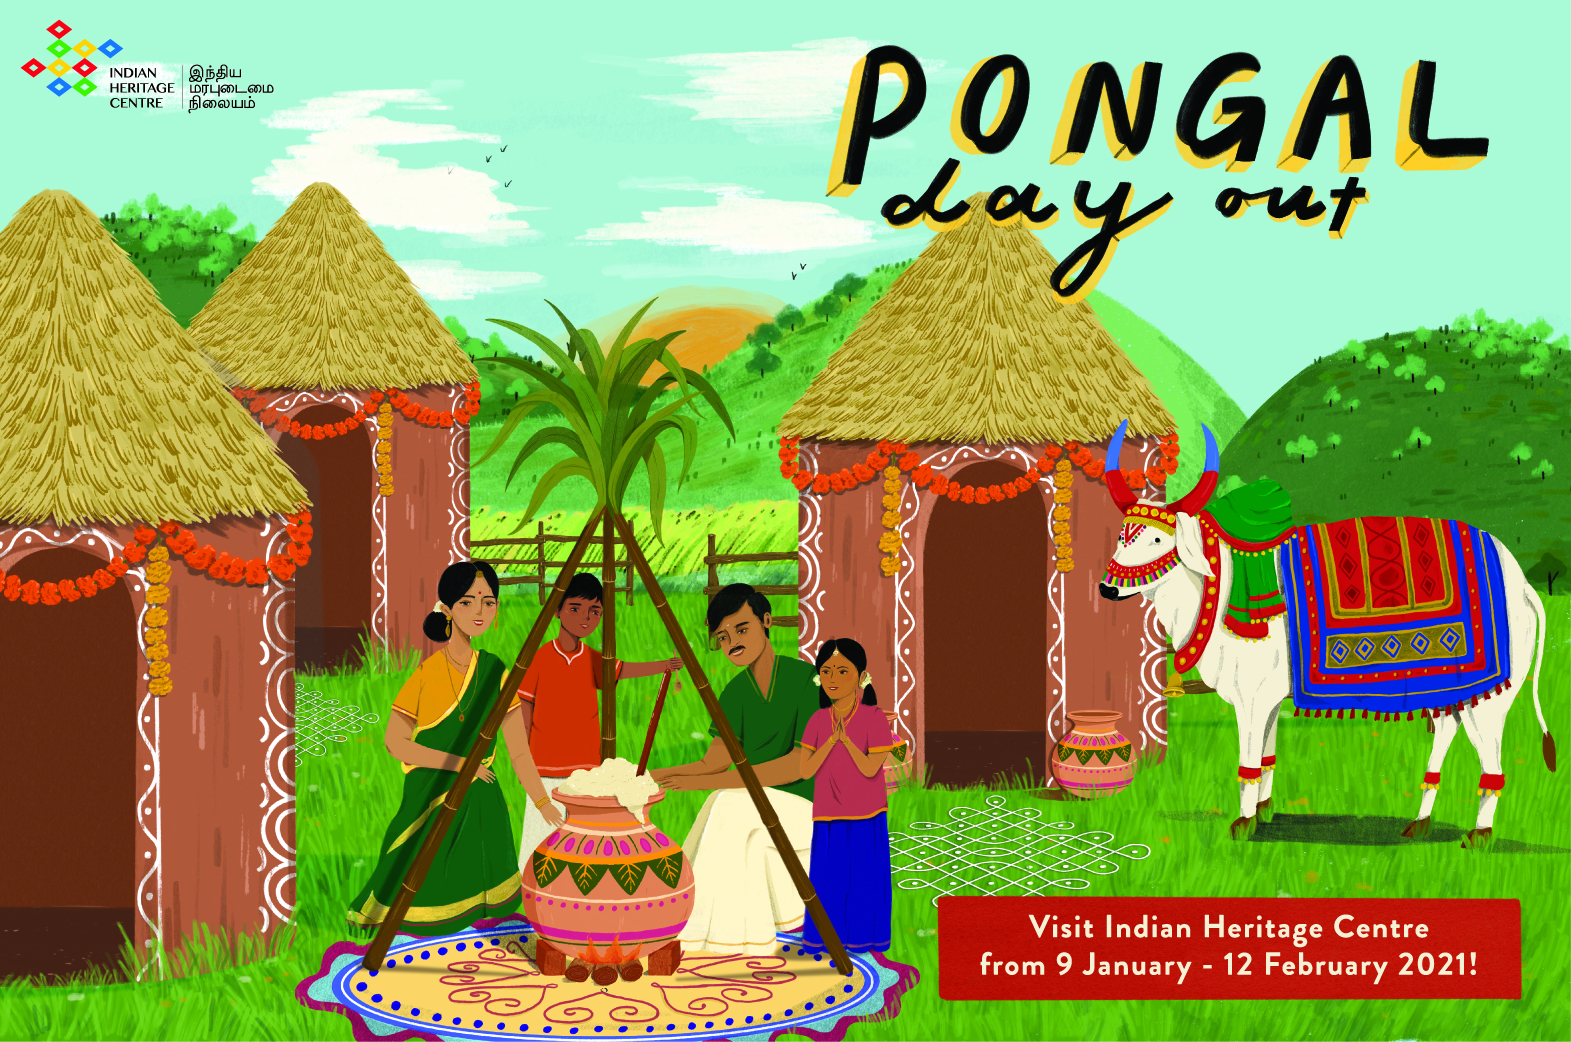 Indian Heritage Centre - Pongal Day Out 2021